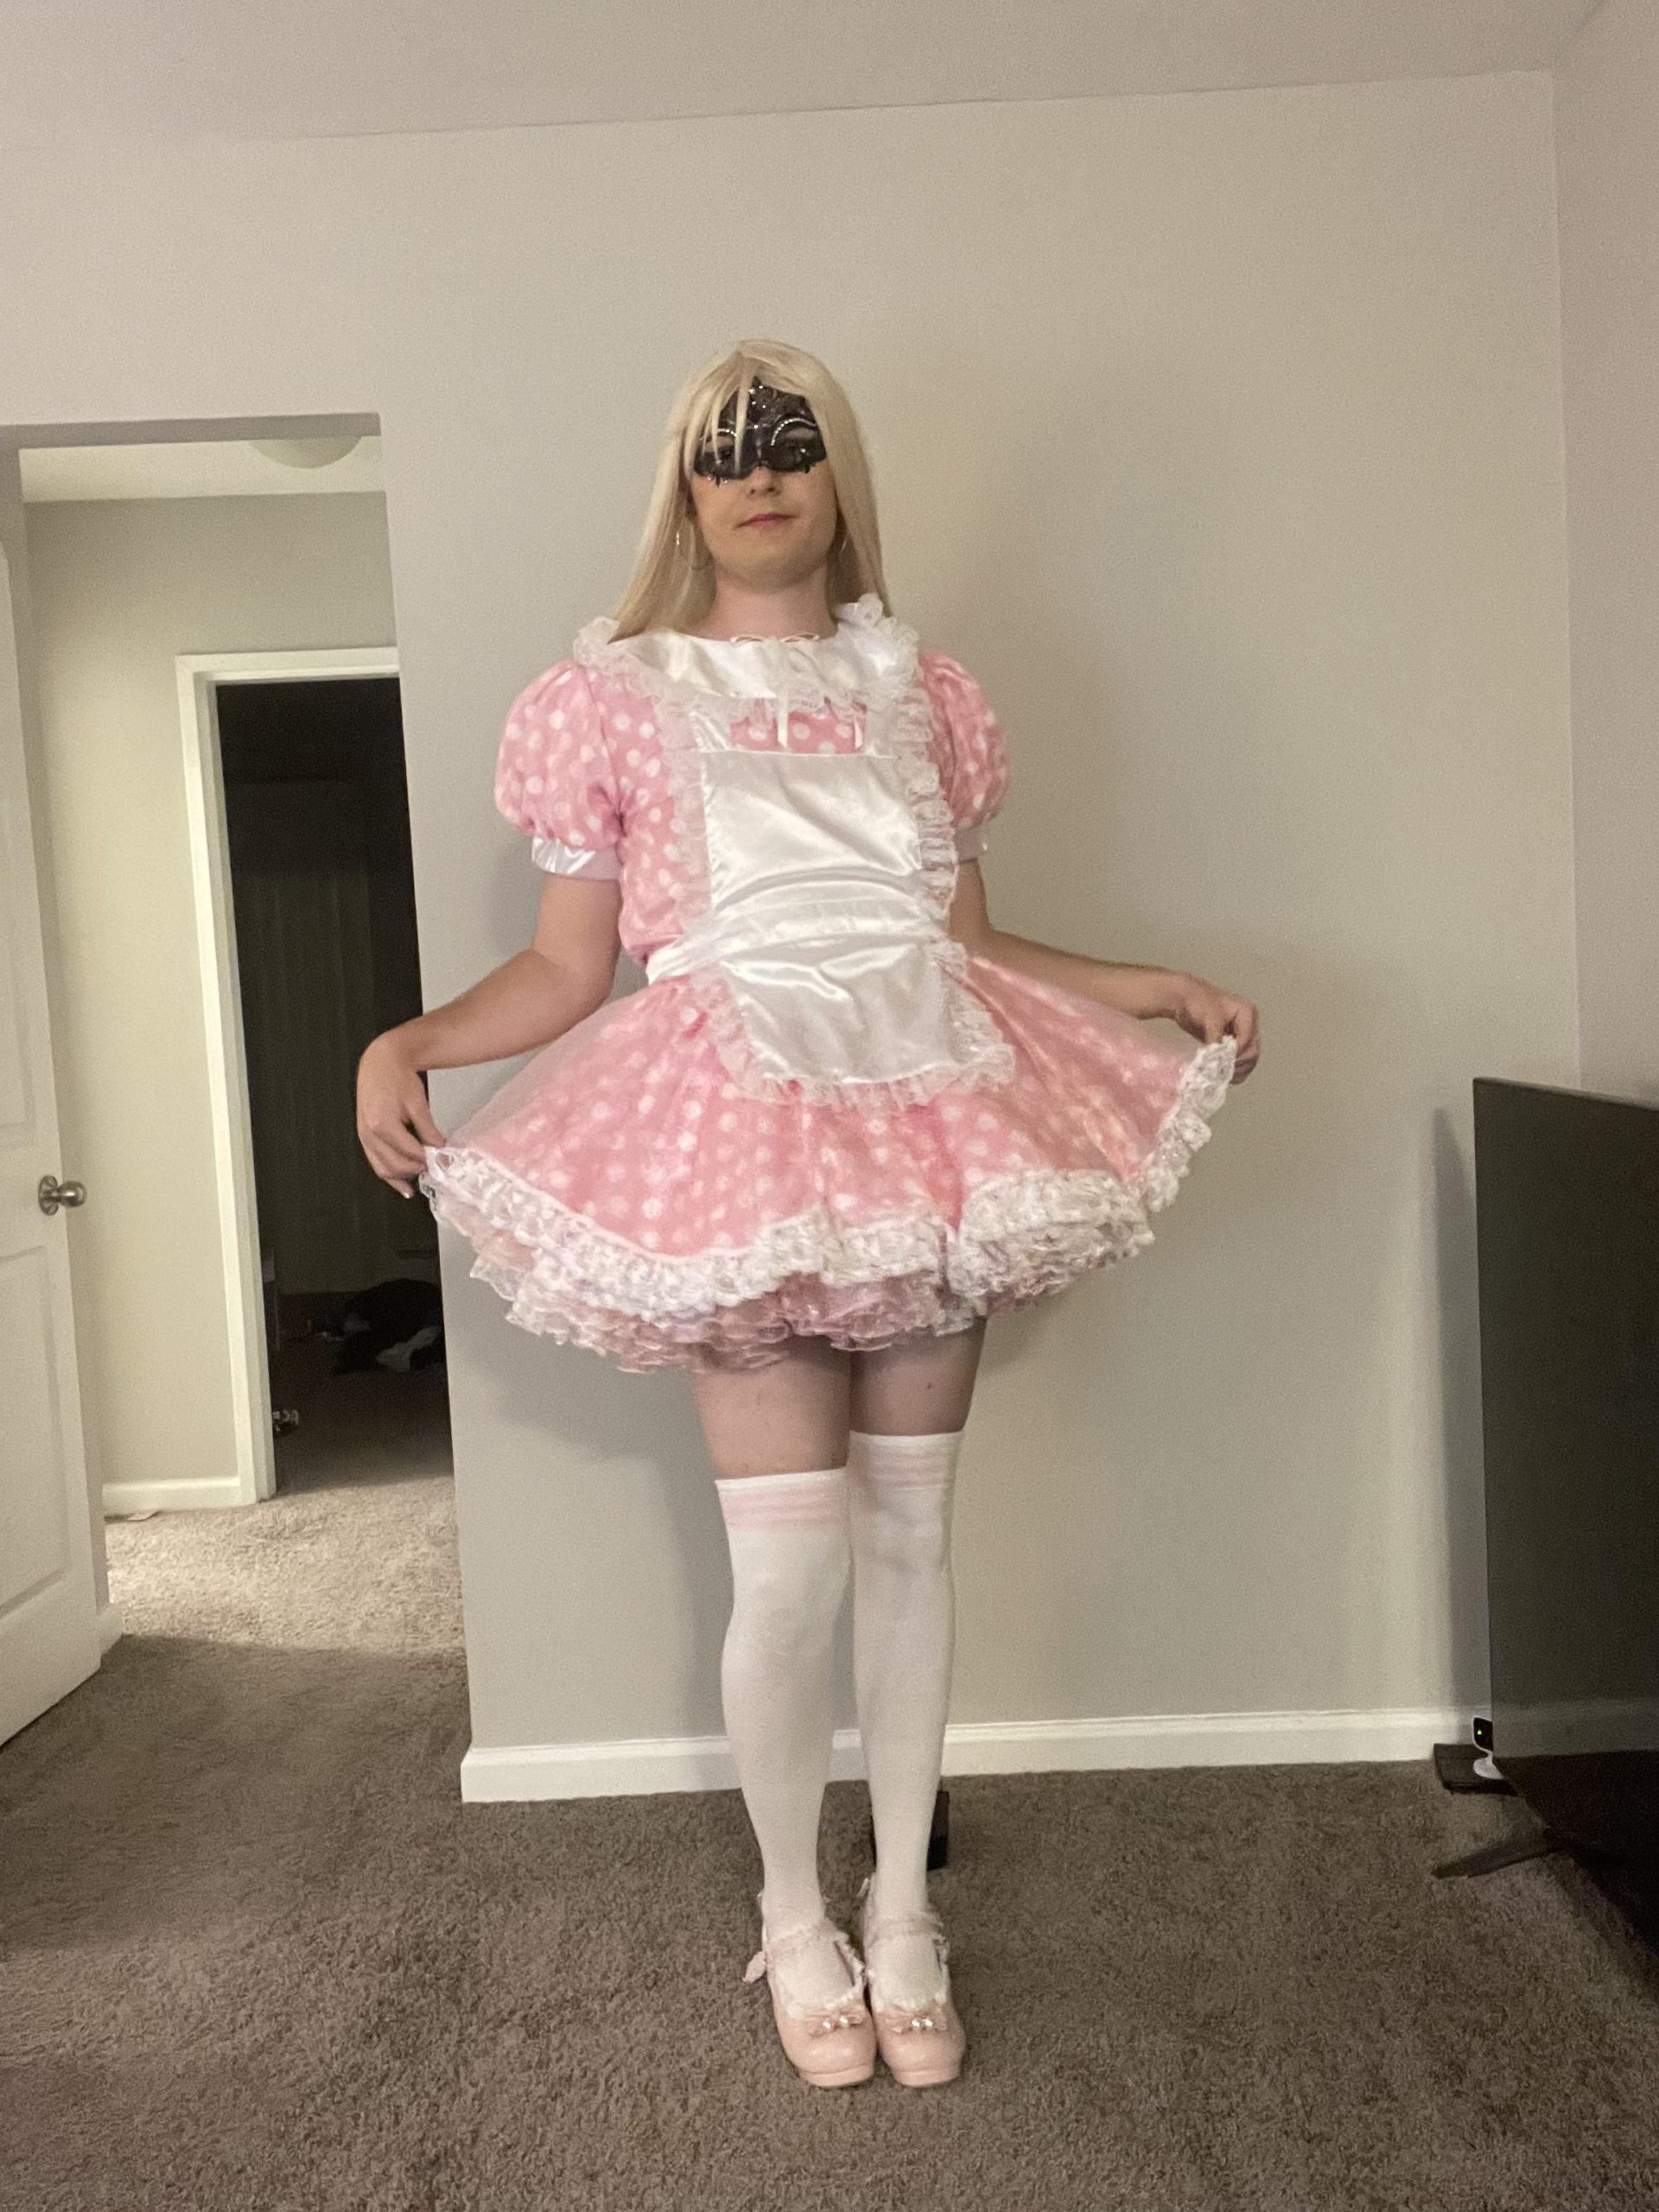 Sissy is getting desperately horny